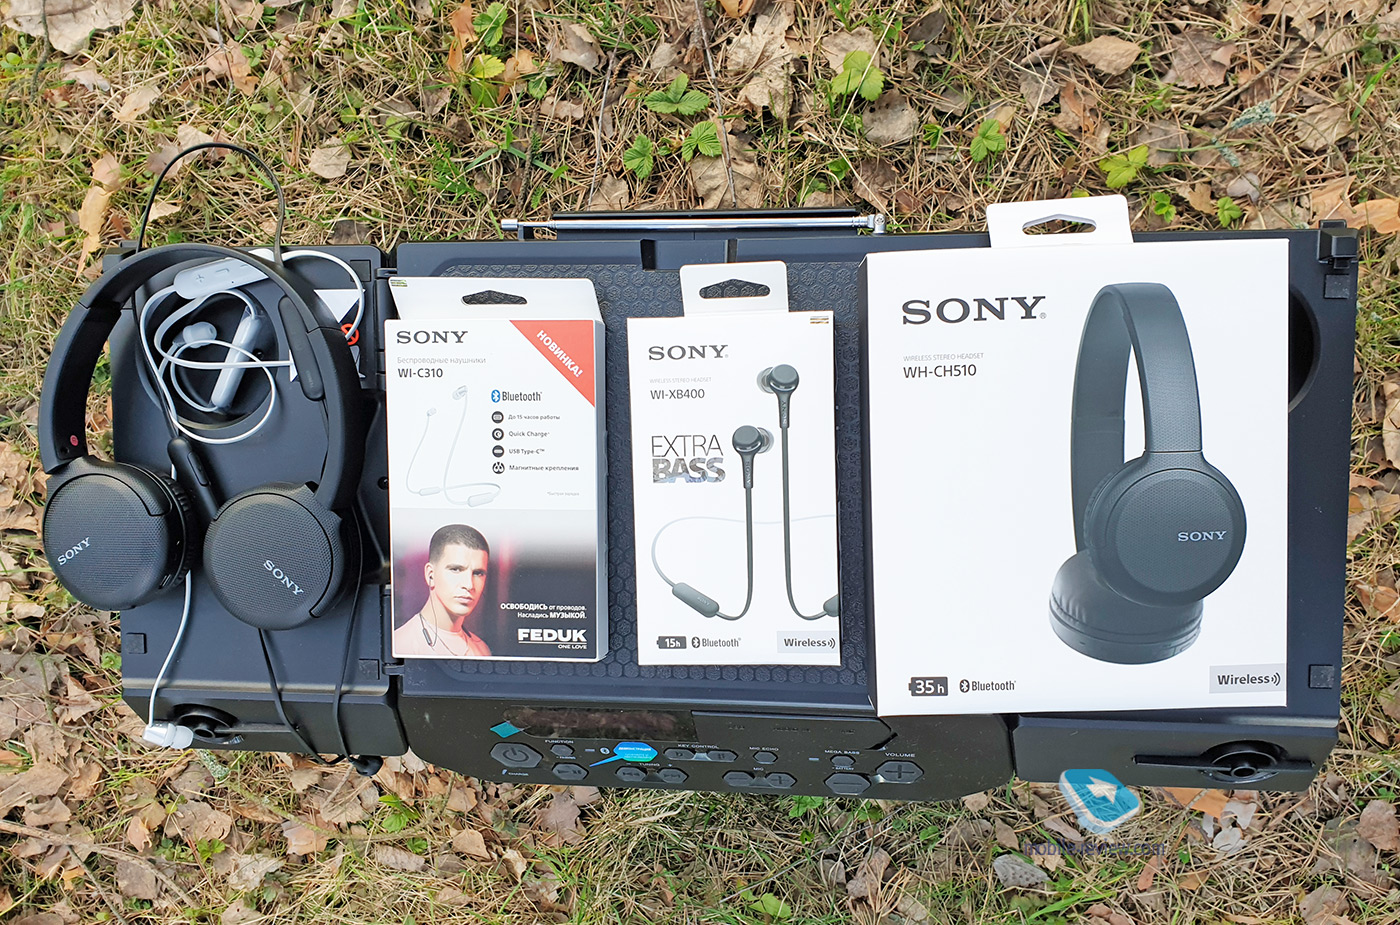 Pro Xperia 5 and 3 pairs of affordable Sony headphones